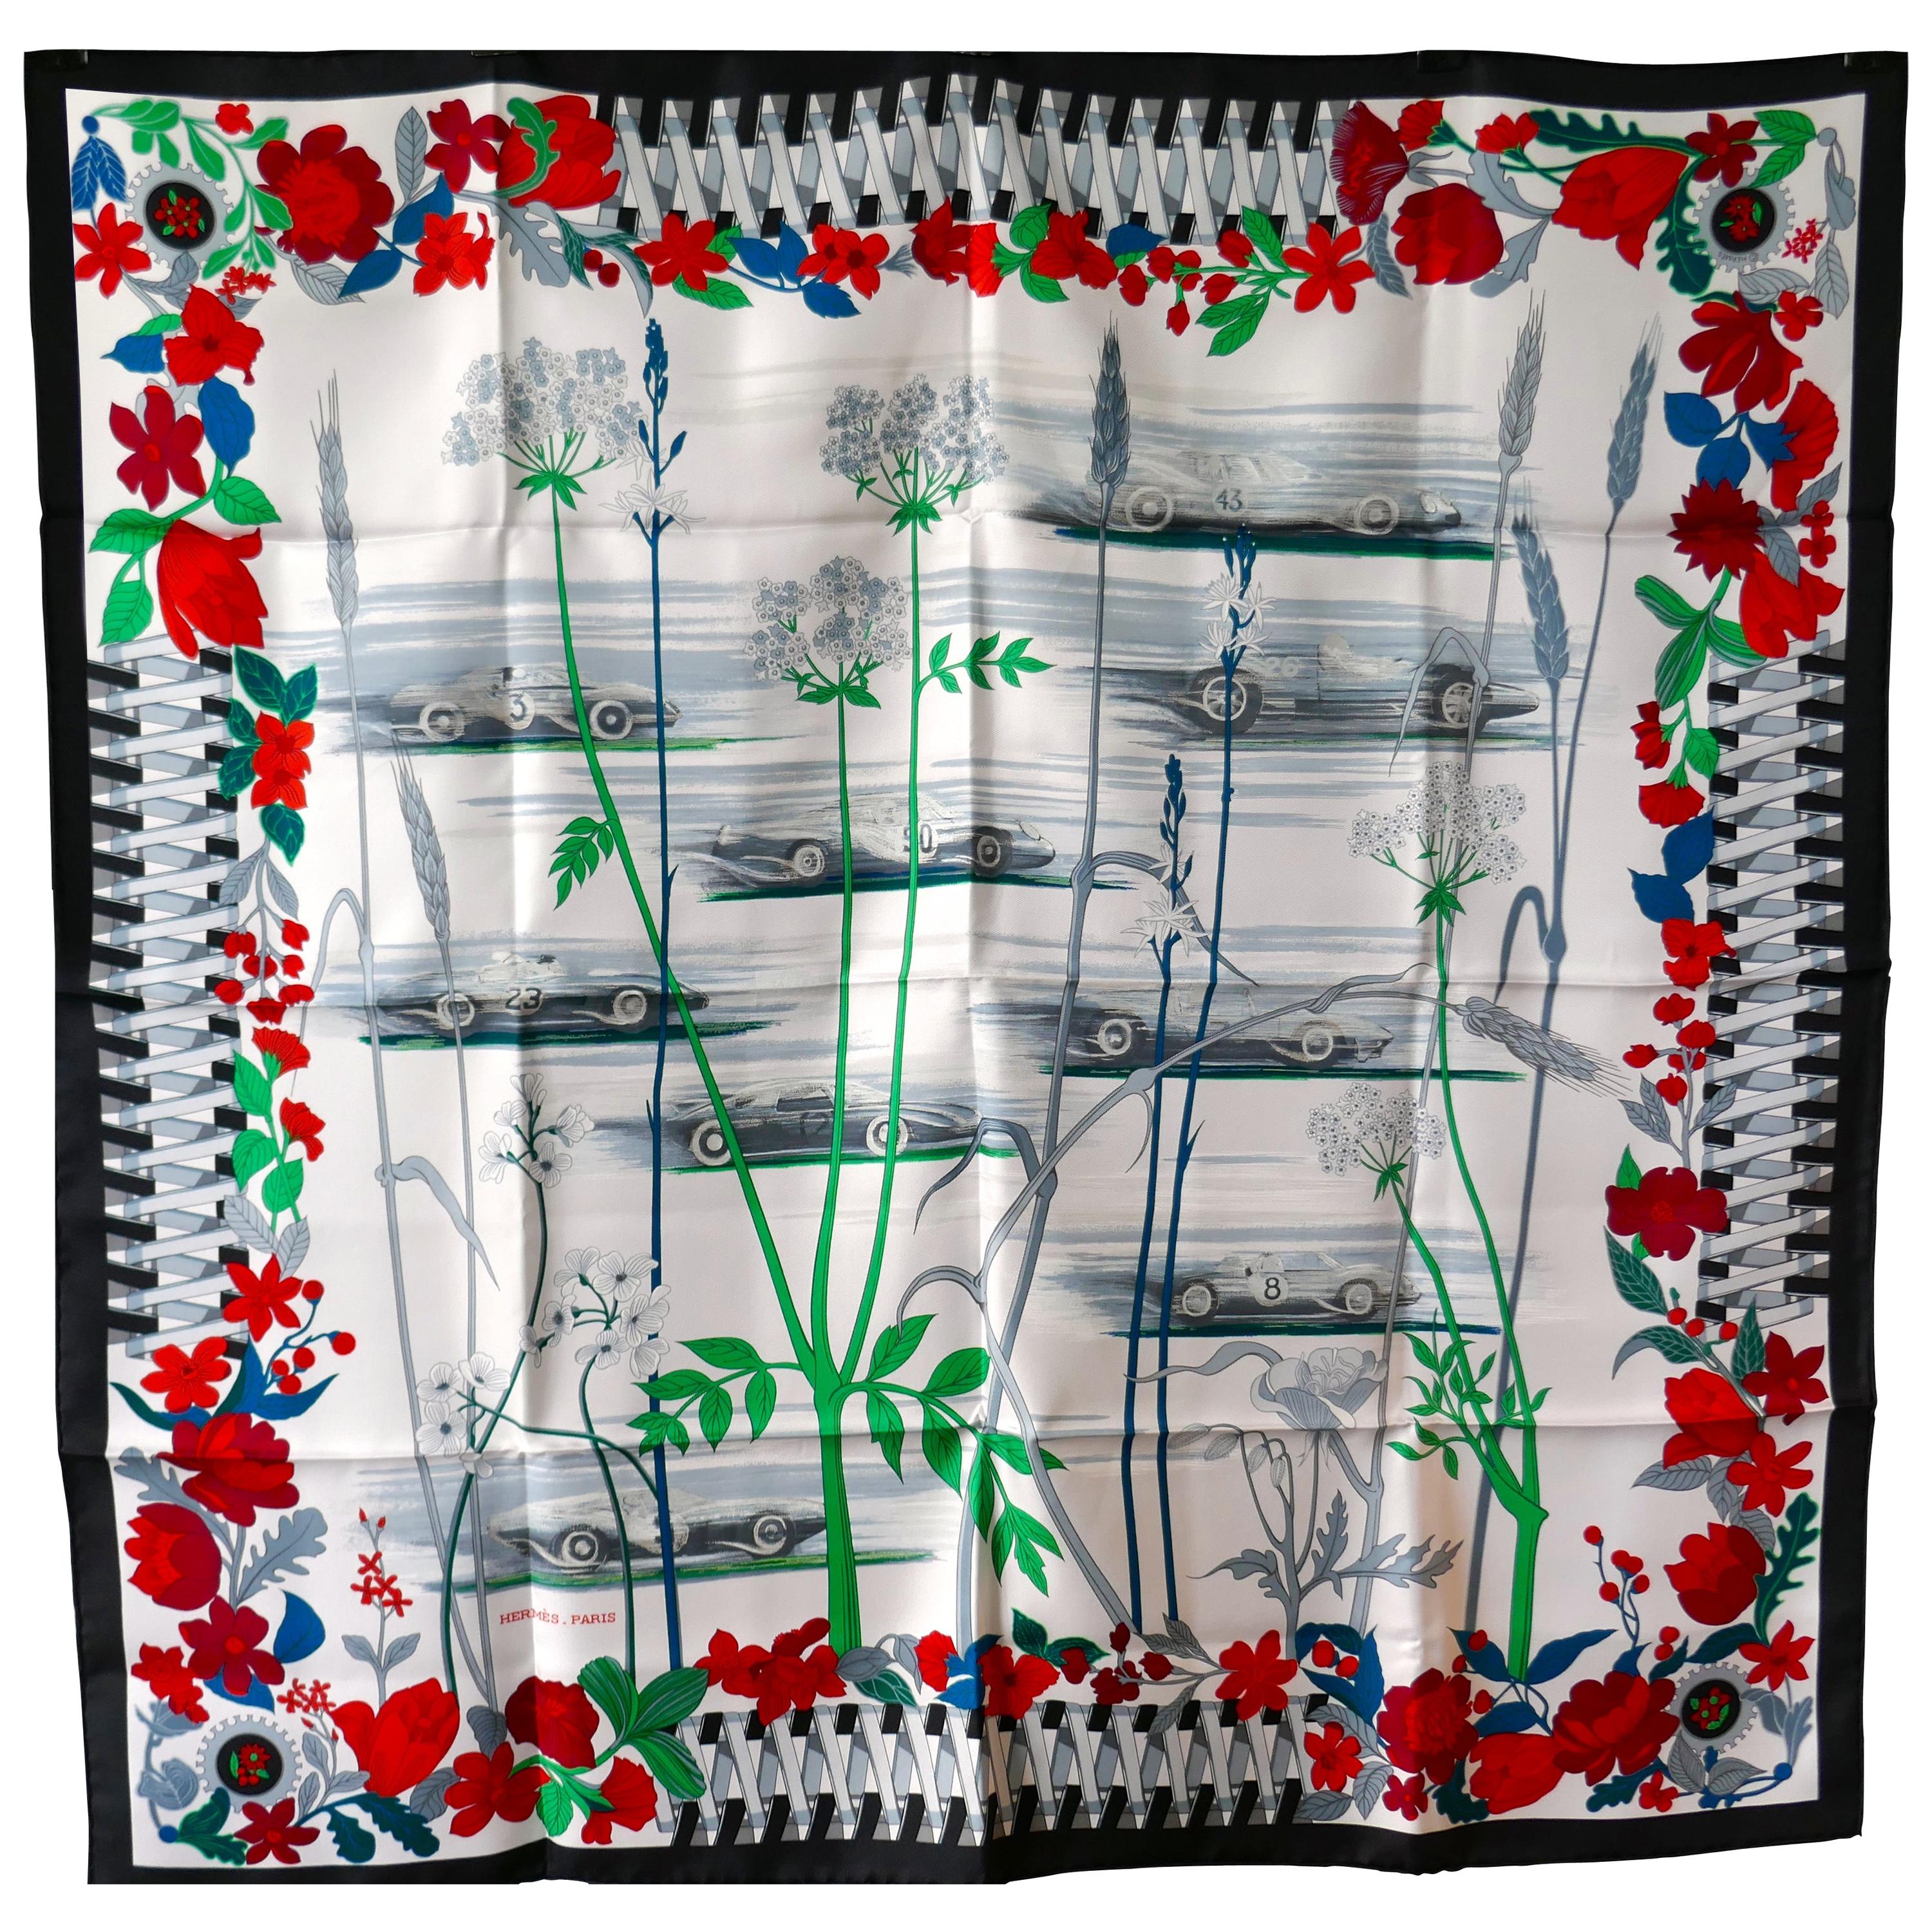 Rare New Hermes 100% Silk Scarf “Les Bolides” by Rena Dumas